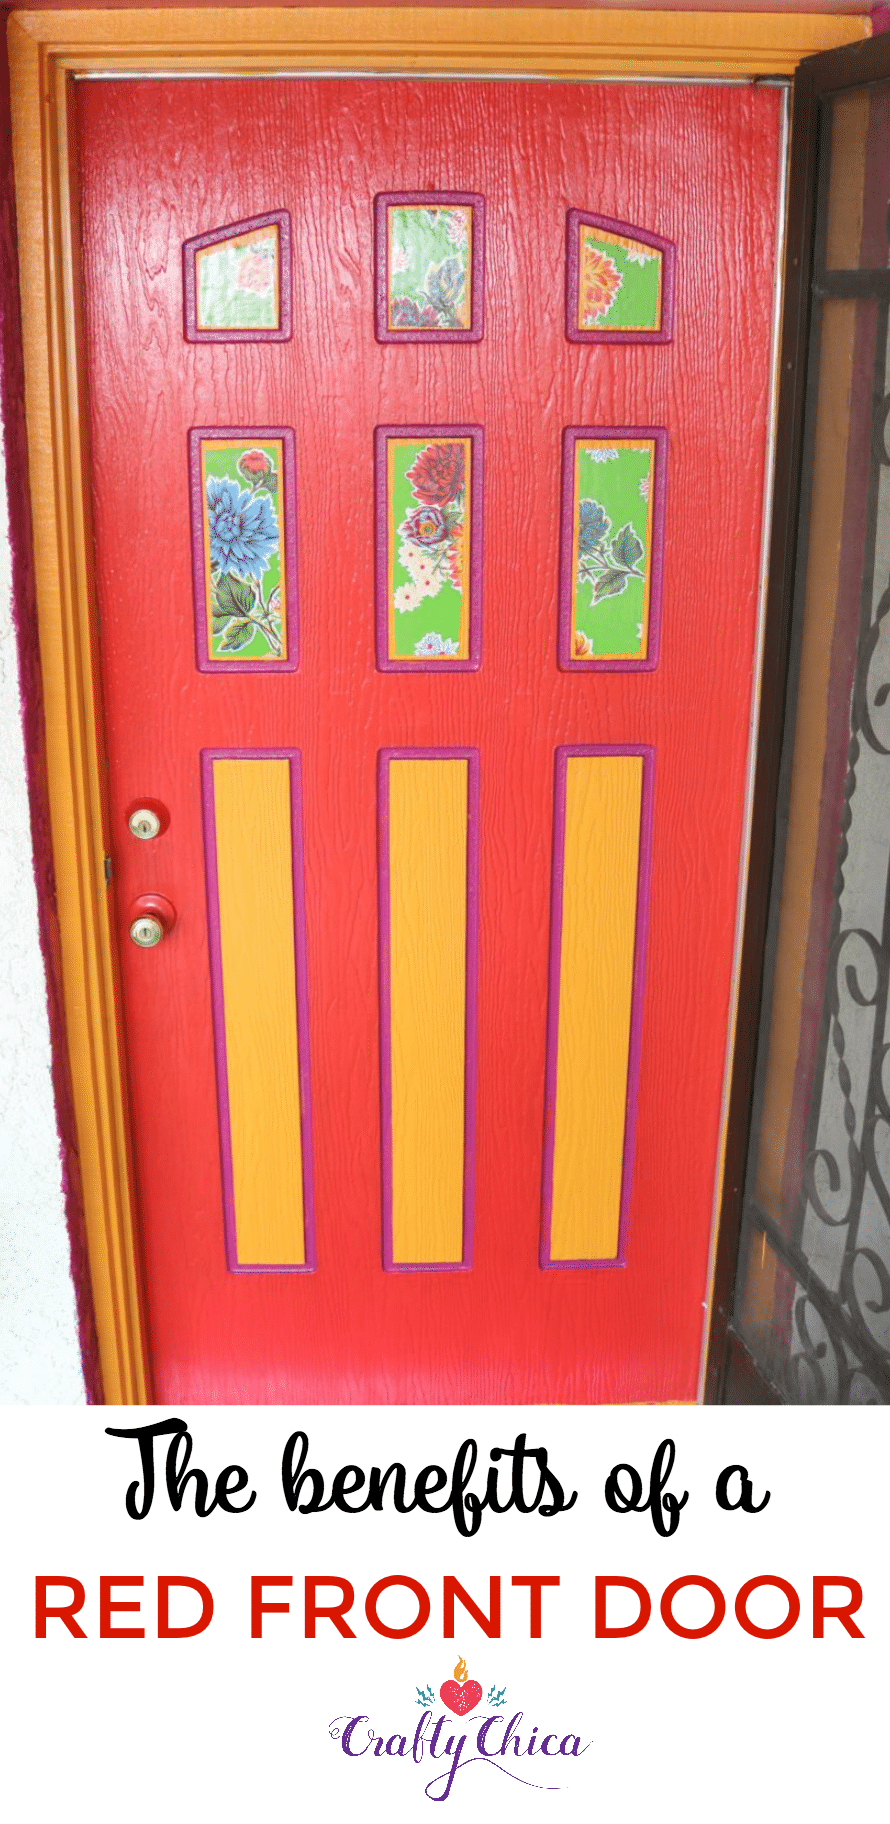 Meaning of a red front door, CraftyChica.com